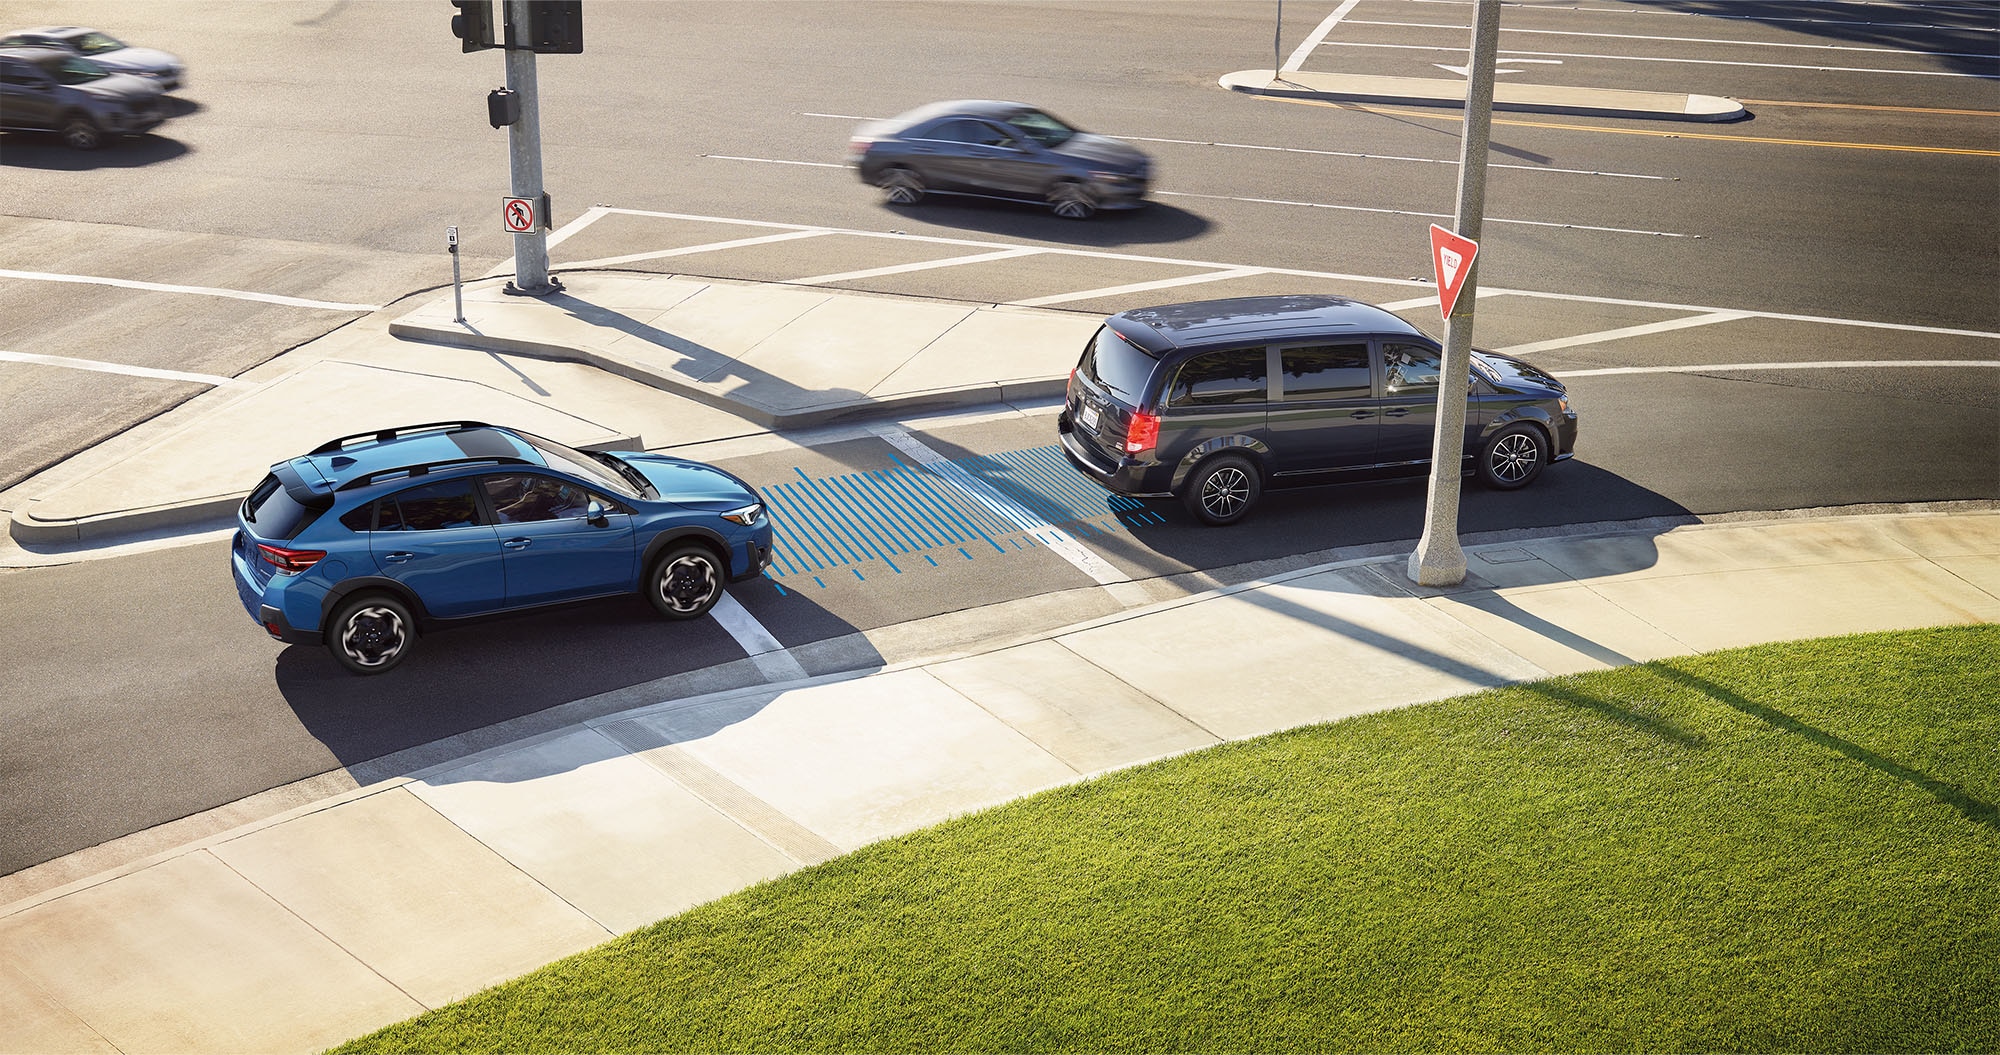  A photo illustration showing the Advanced Adaptive Cruise Control with Lane Centering feature on the 2023 Crosstrek.